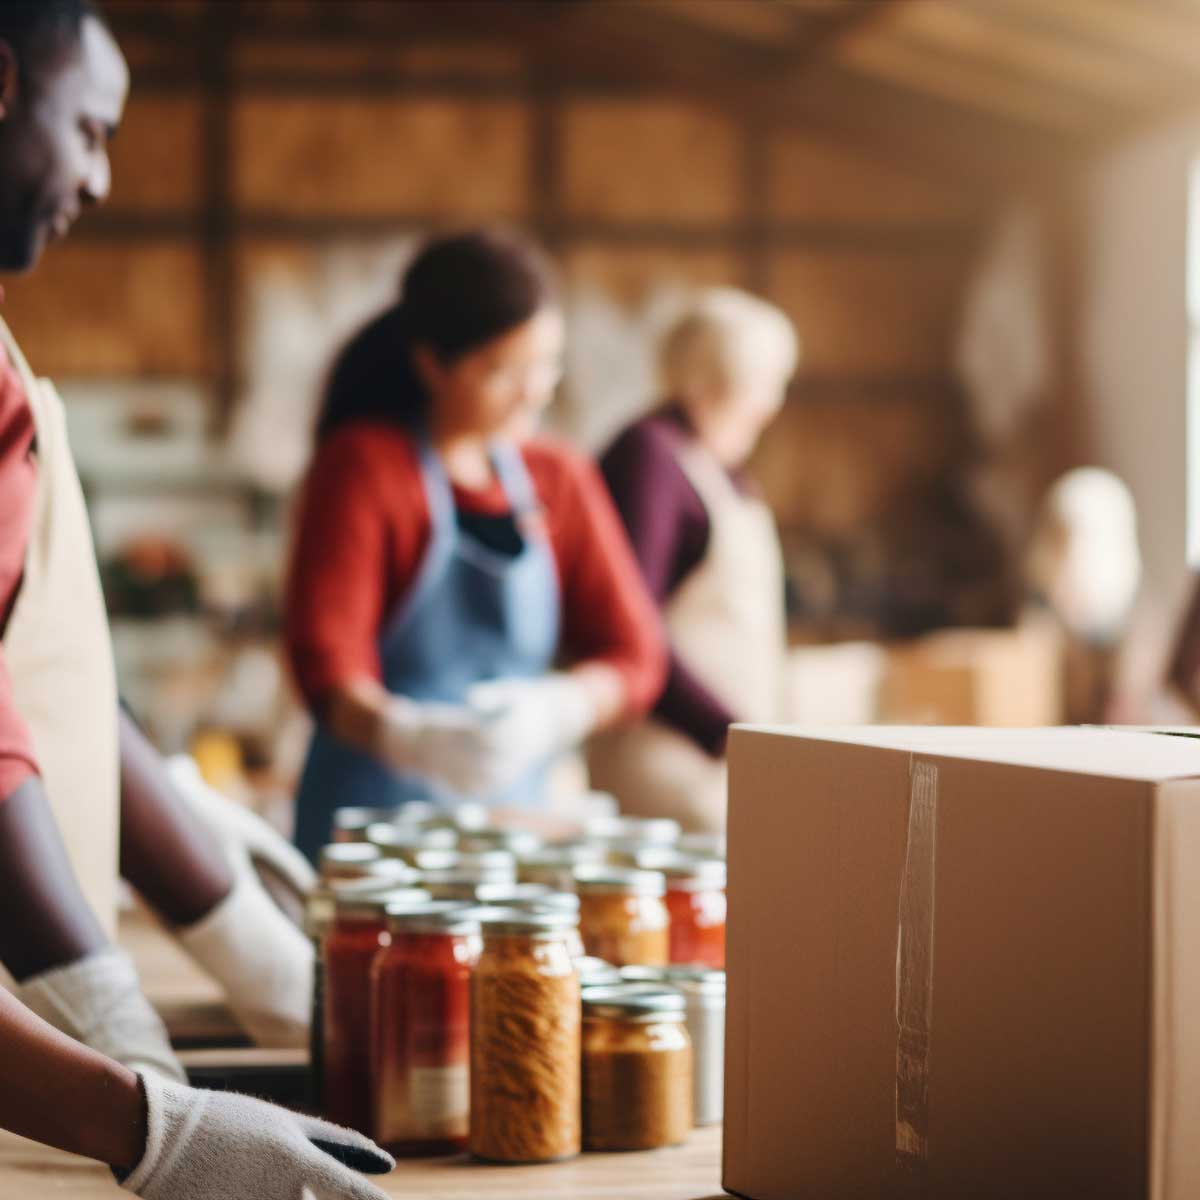 A-group-of-People-Volunteering-for-a-not-for-profit-organization. close up on cardboard box with canned goods next to it. blurred background of volunteers helping sort and pack supplies